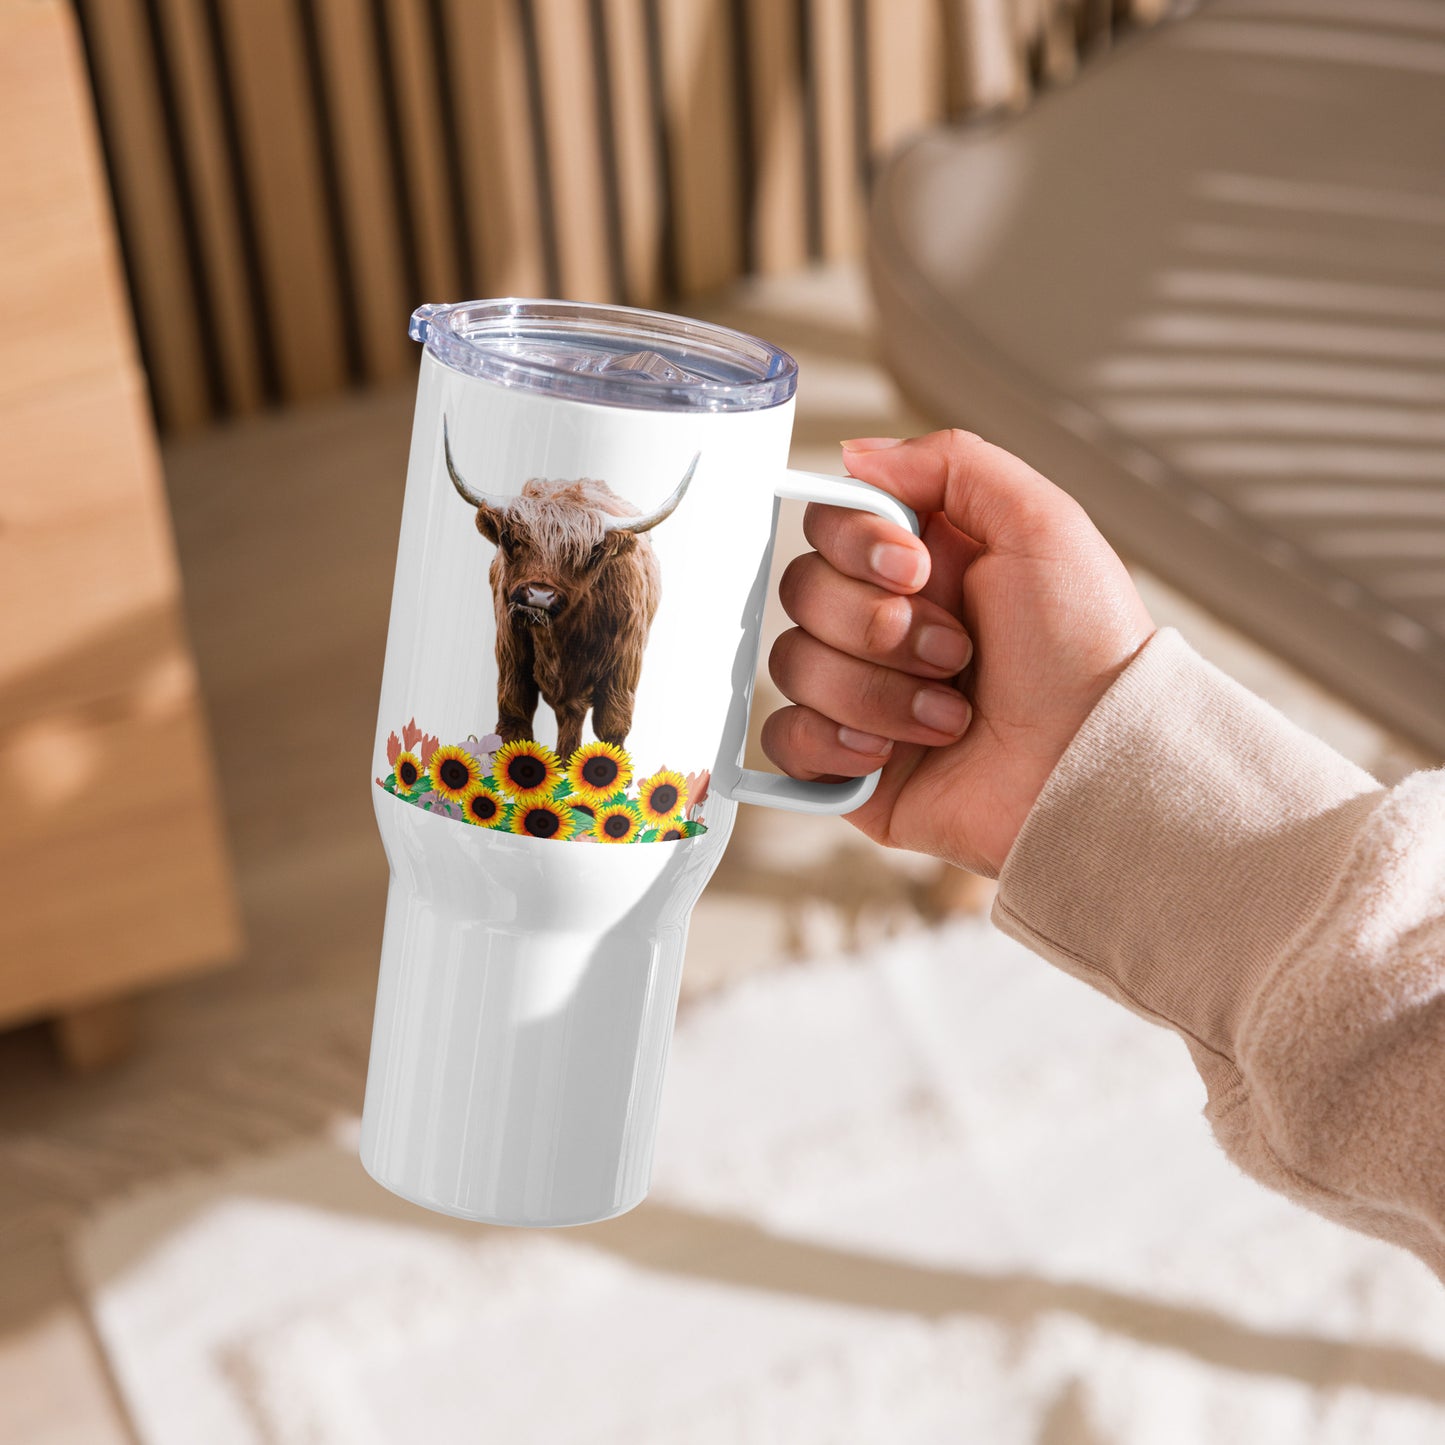 Sip Nature's Charm On The Go with our Captivating Highland Cow in Sunflower Field Travel Mug - White Travel mug with a handle